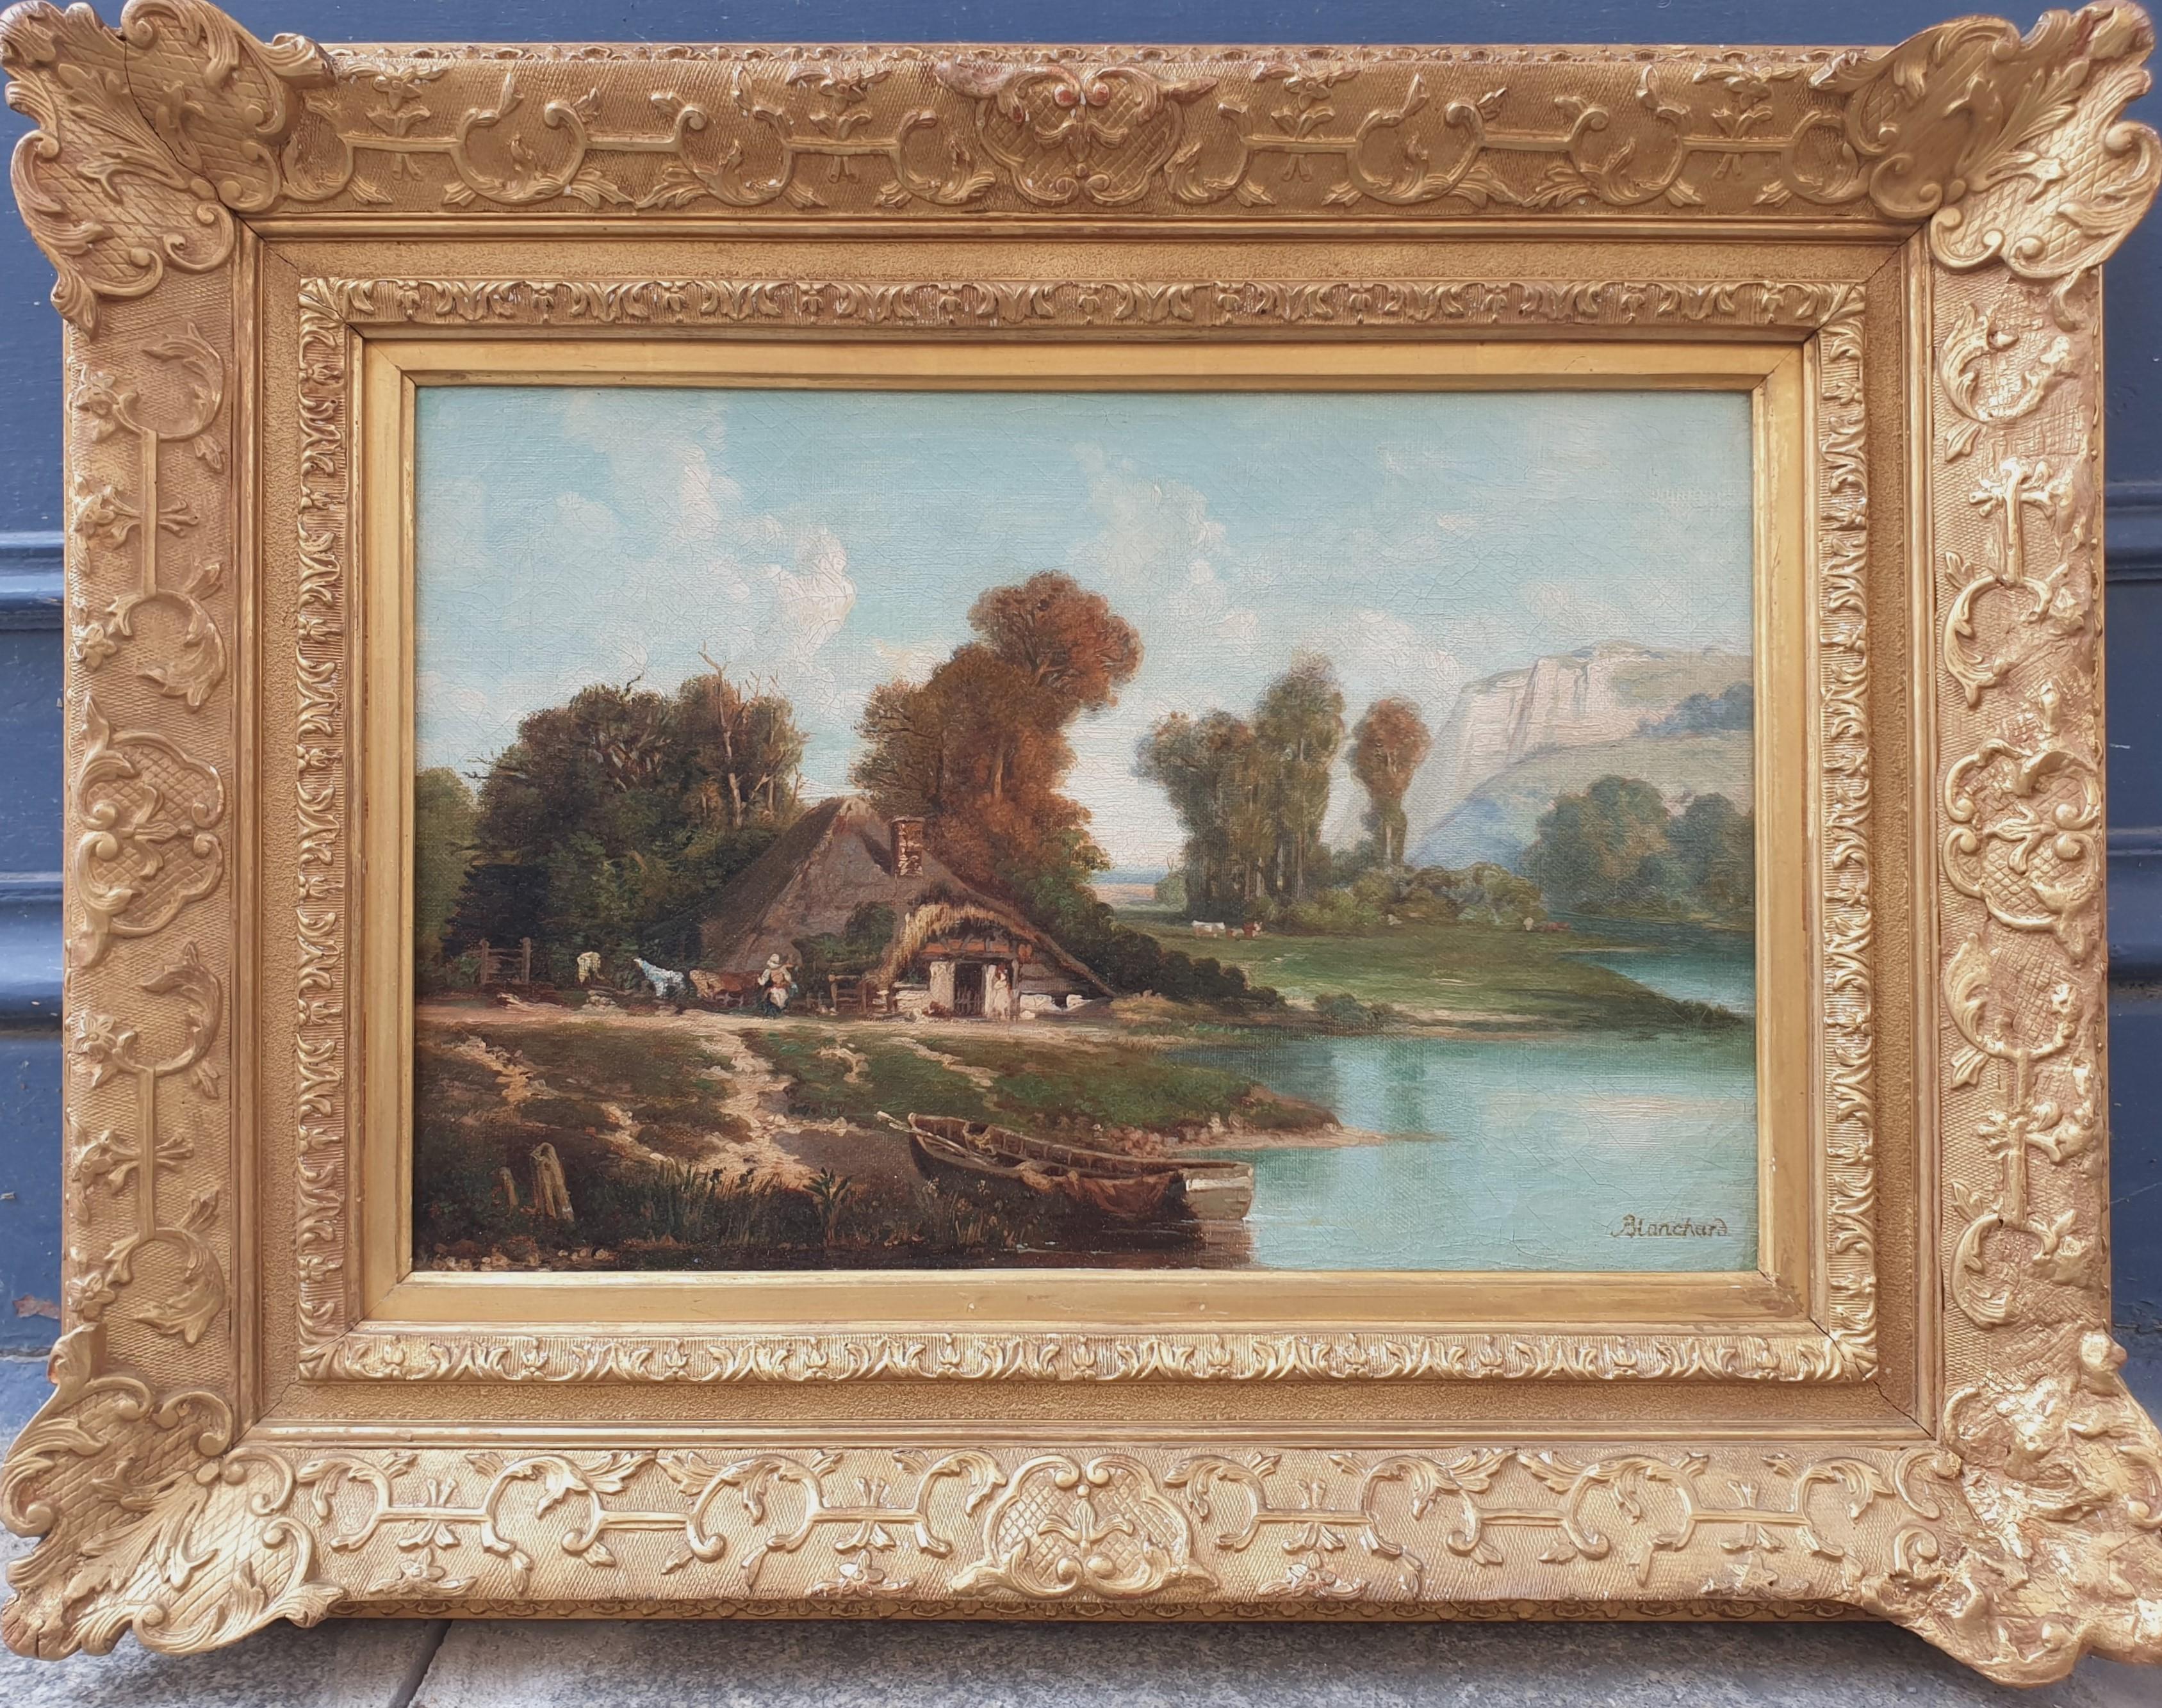 Théophile Clément BLANCHARD 1820 - 1849
Oil on canvas
27 x 40 cm (45 x 58 cm with the frame)
Signed lower right "Blanchard"
Very nice 19th century gilded wooden frame

French painter, lithographer and illustrator, Théophile Clément Blanchard is part